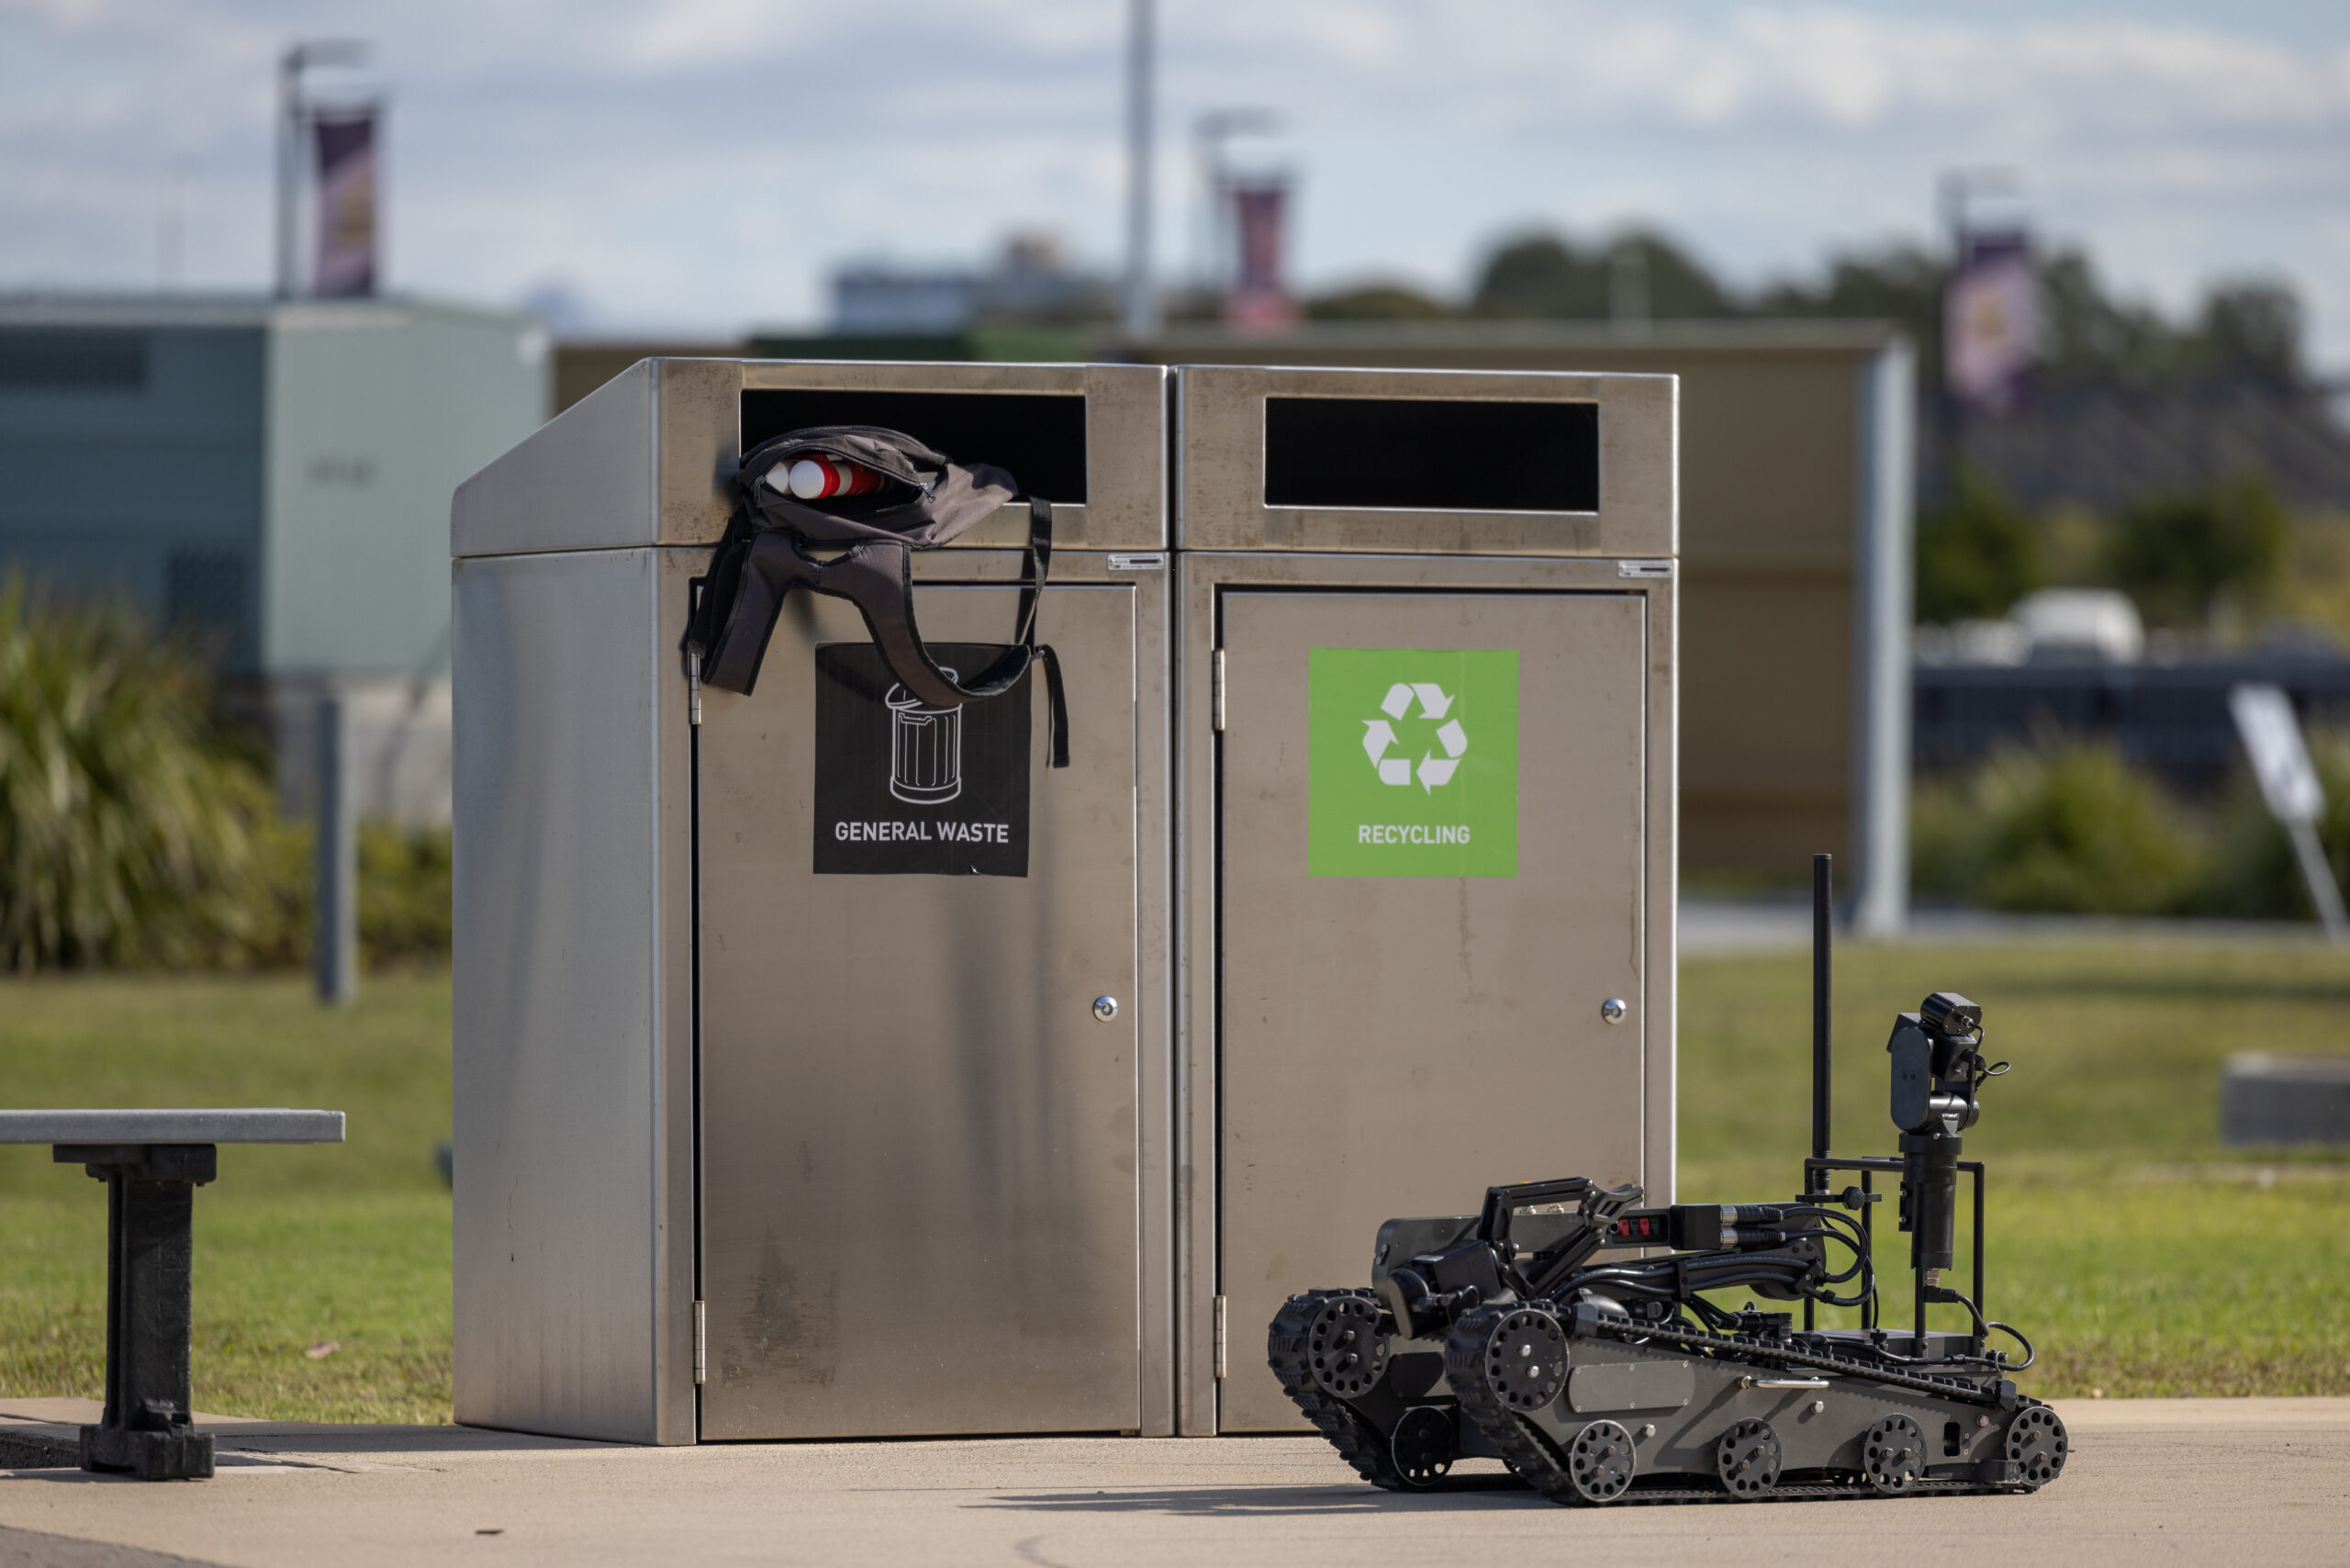 A bomb disposal robot from the Queensland Police Service identifies a suspicious package placed outside of the Country Bank Stadium as part of Exercise Austral Shield 22 in Townsville, Queensland. *** Local Caption *** Exercise Austral Shield 2022 is designed to exercise the Australian Defence Forces short-notice contingency reaction in the execution of Domestic Security Response options to a domestic security threat, in accordance with Part IIIAAA of the Defence Act 1903. Held this year in Townsville, the exercise utilises a Special Operations element and Reserve forces mobilised from Sydney and Brisbane at short notice to assist the Queensland Police Service in the execution of Domestic Security Response against a simulated terror threat. Exercises like Austral Shield are an essential part of maintaining an agile and ready force. The Australian Defence Force maintains short notice and specialist capabilities that may be called upon, under Commonwealth direction, to assist the civilian authorities in responding to violent incidents, including terrorism.